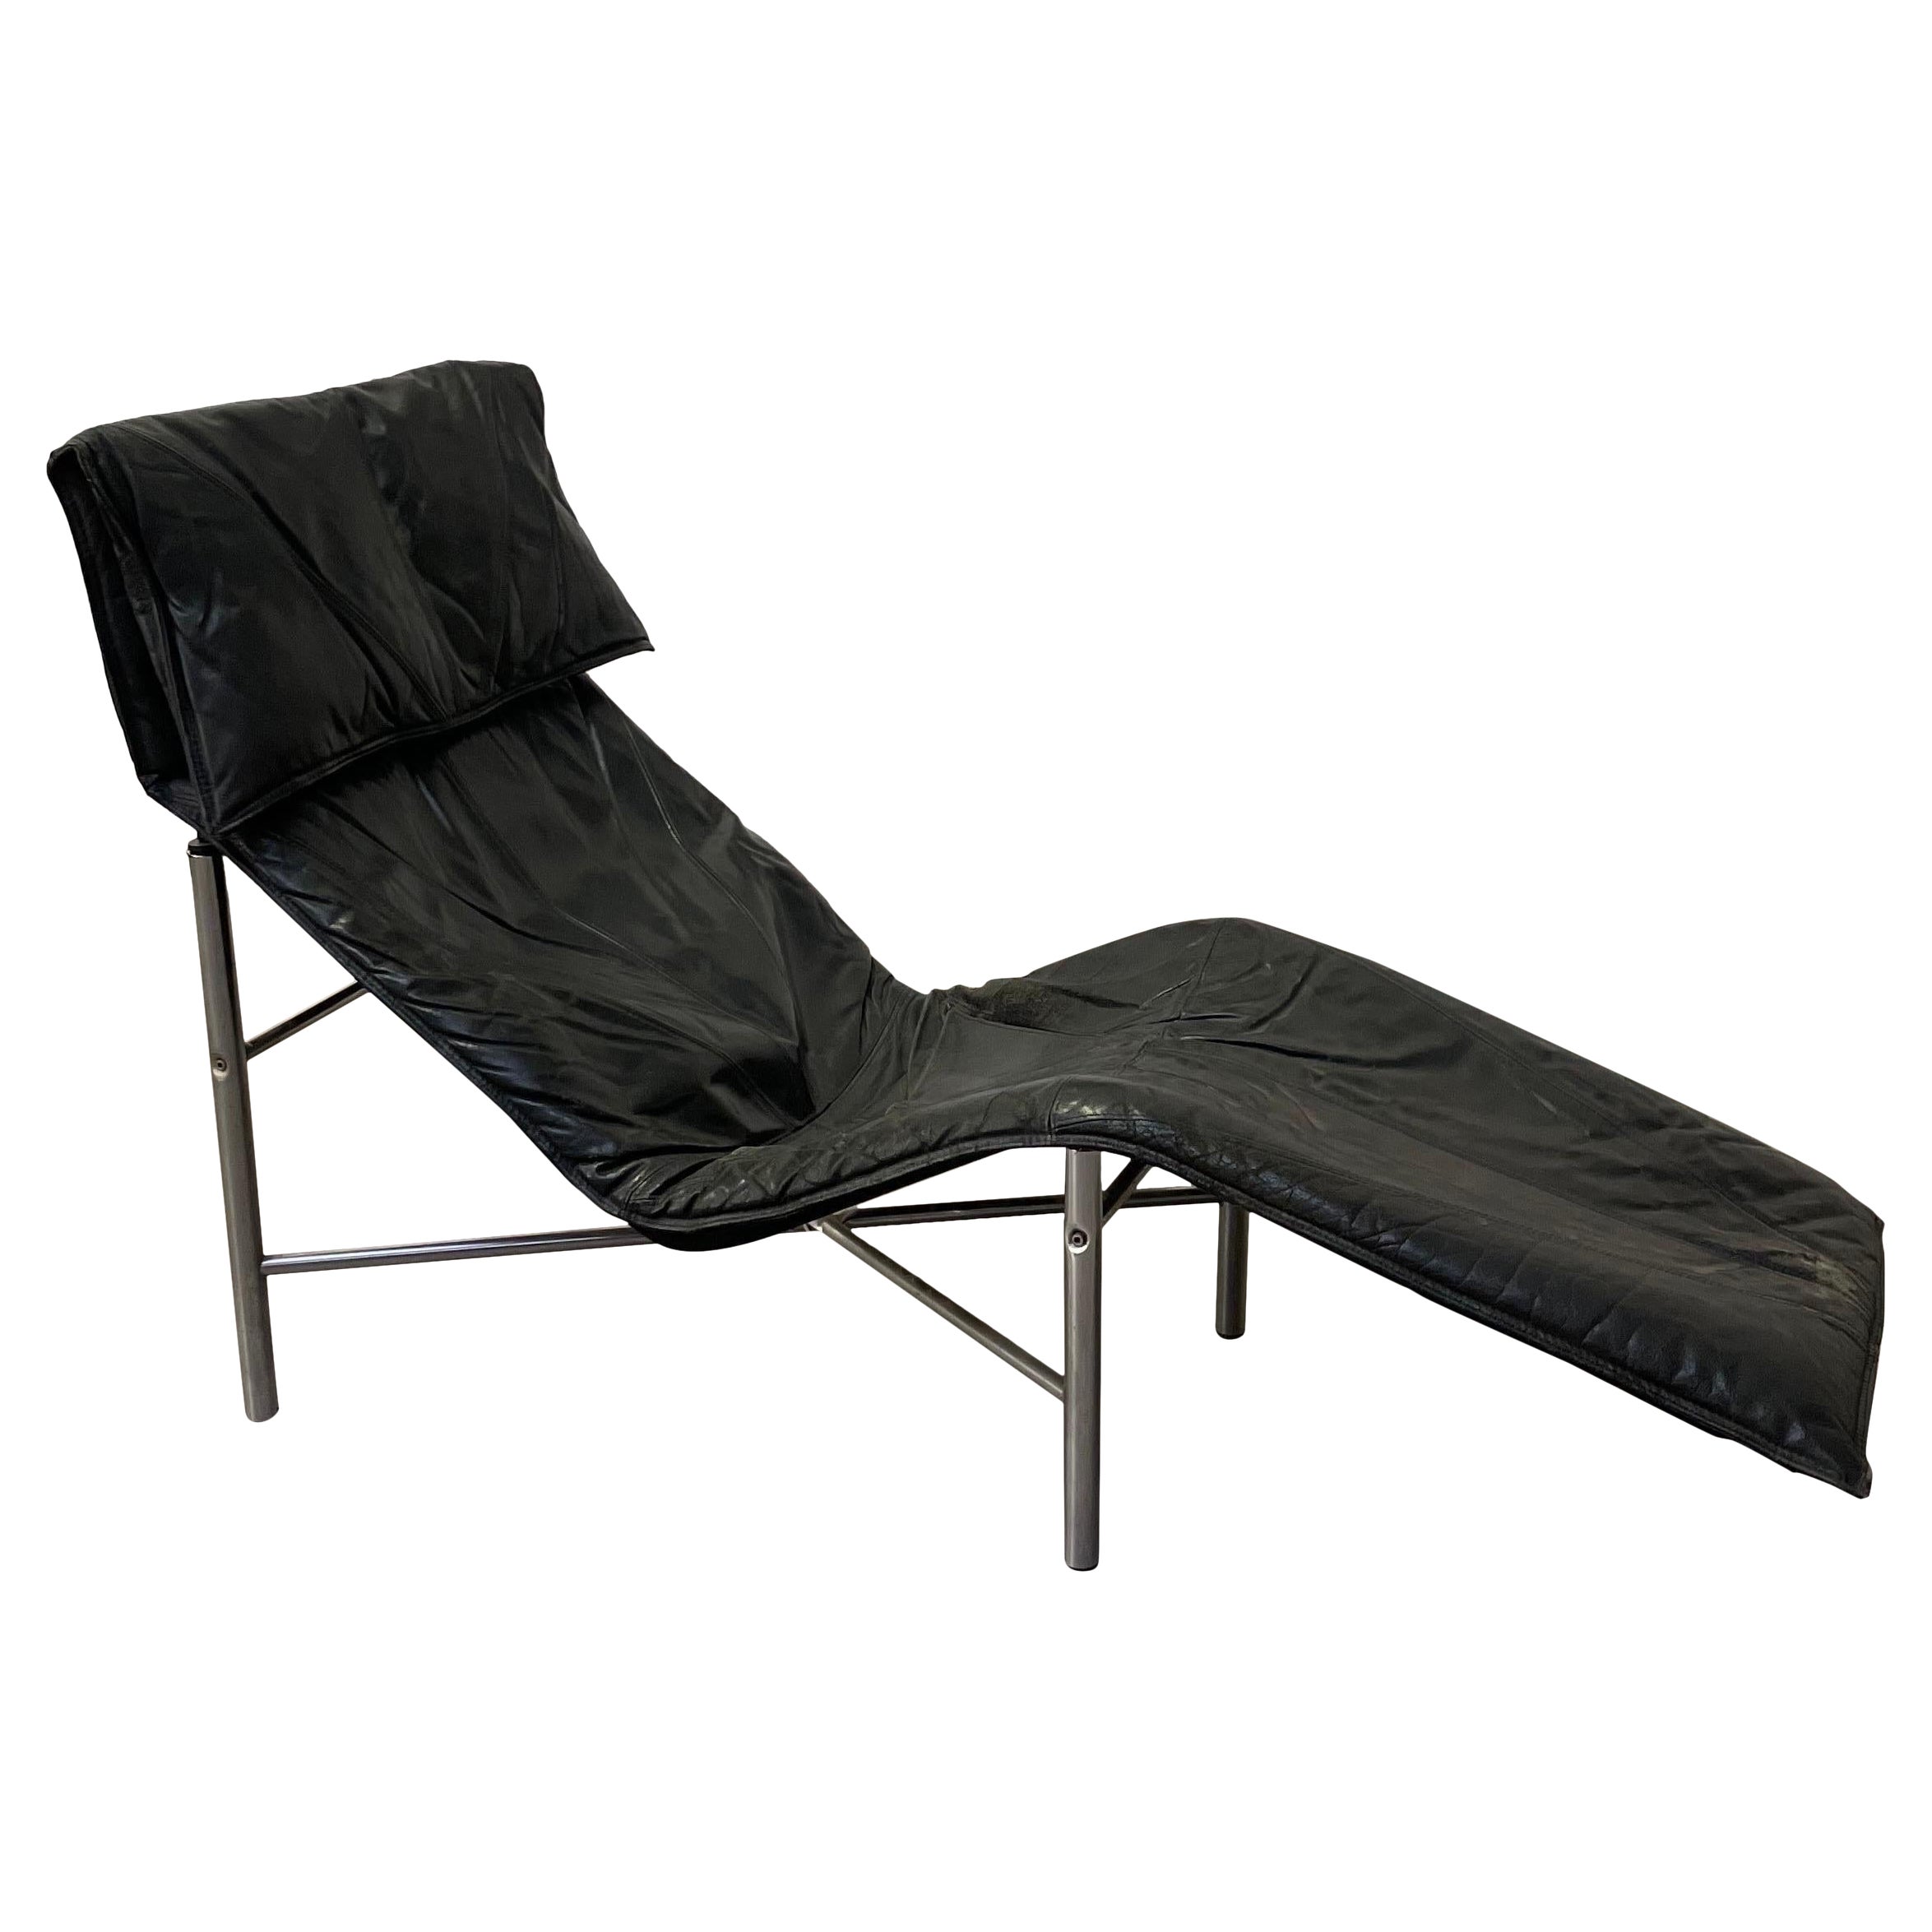 Black Leather ‘Skye’ Chaise Longue by Tord Björklund, Ikea Sweden, 1970s For Sale